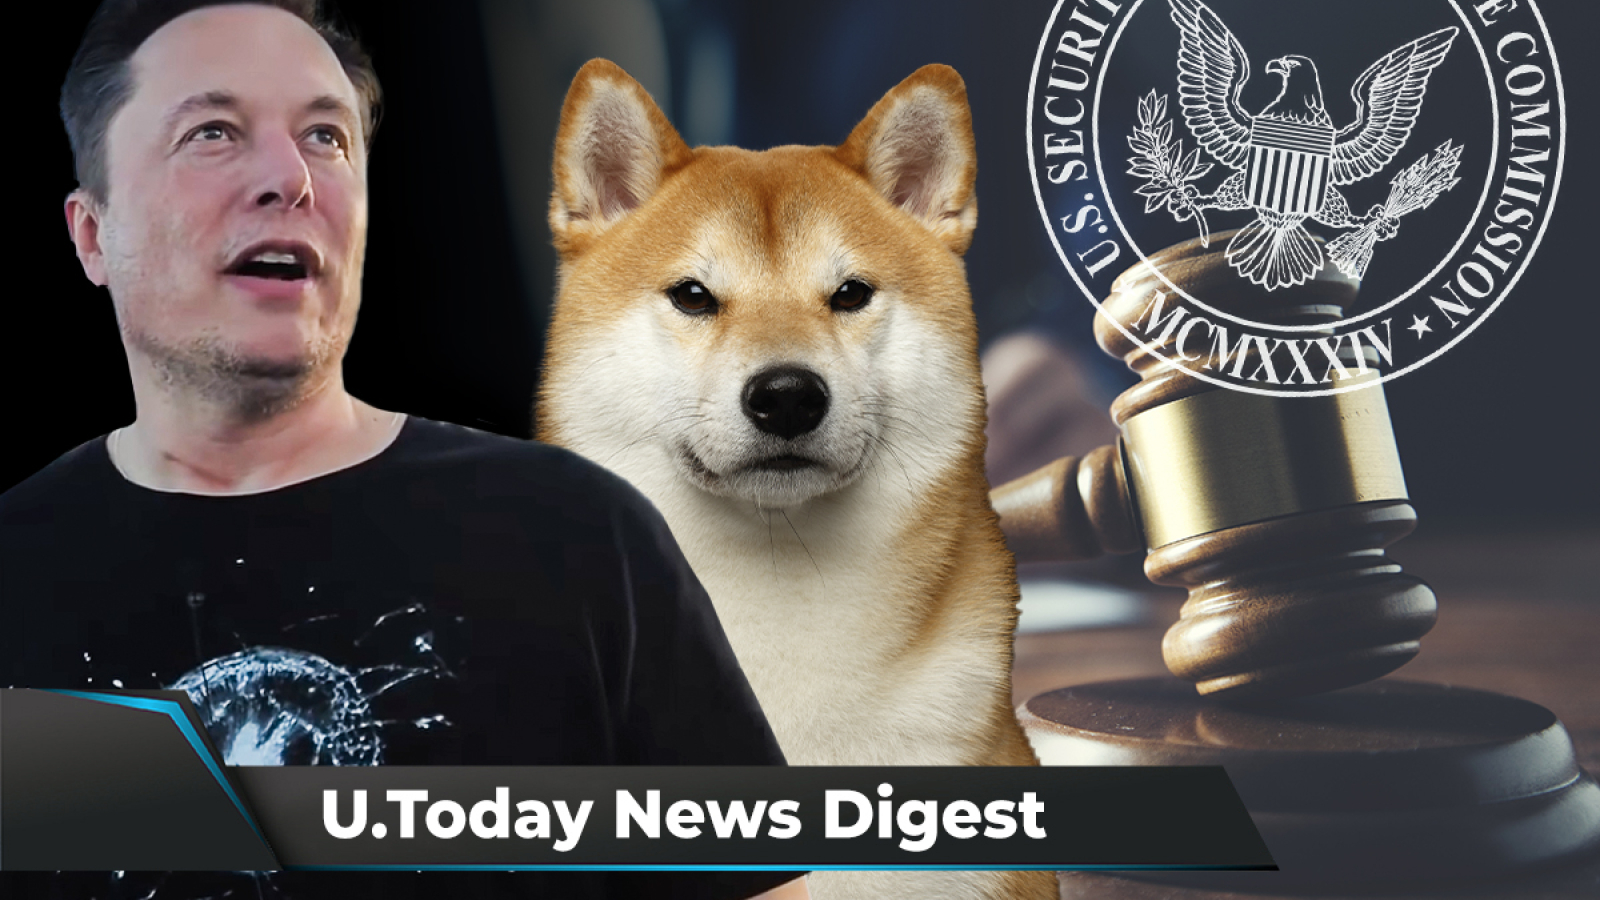 Elon Musk Shiba Inu Photo Sparks Over 90 000 Tweets Xrp Holders To Help Court Crypto News Digest By U Today